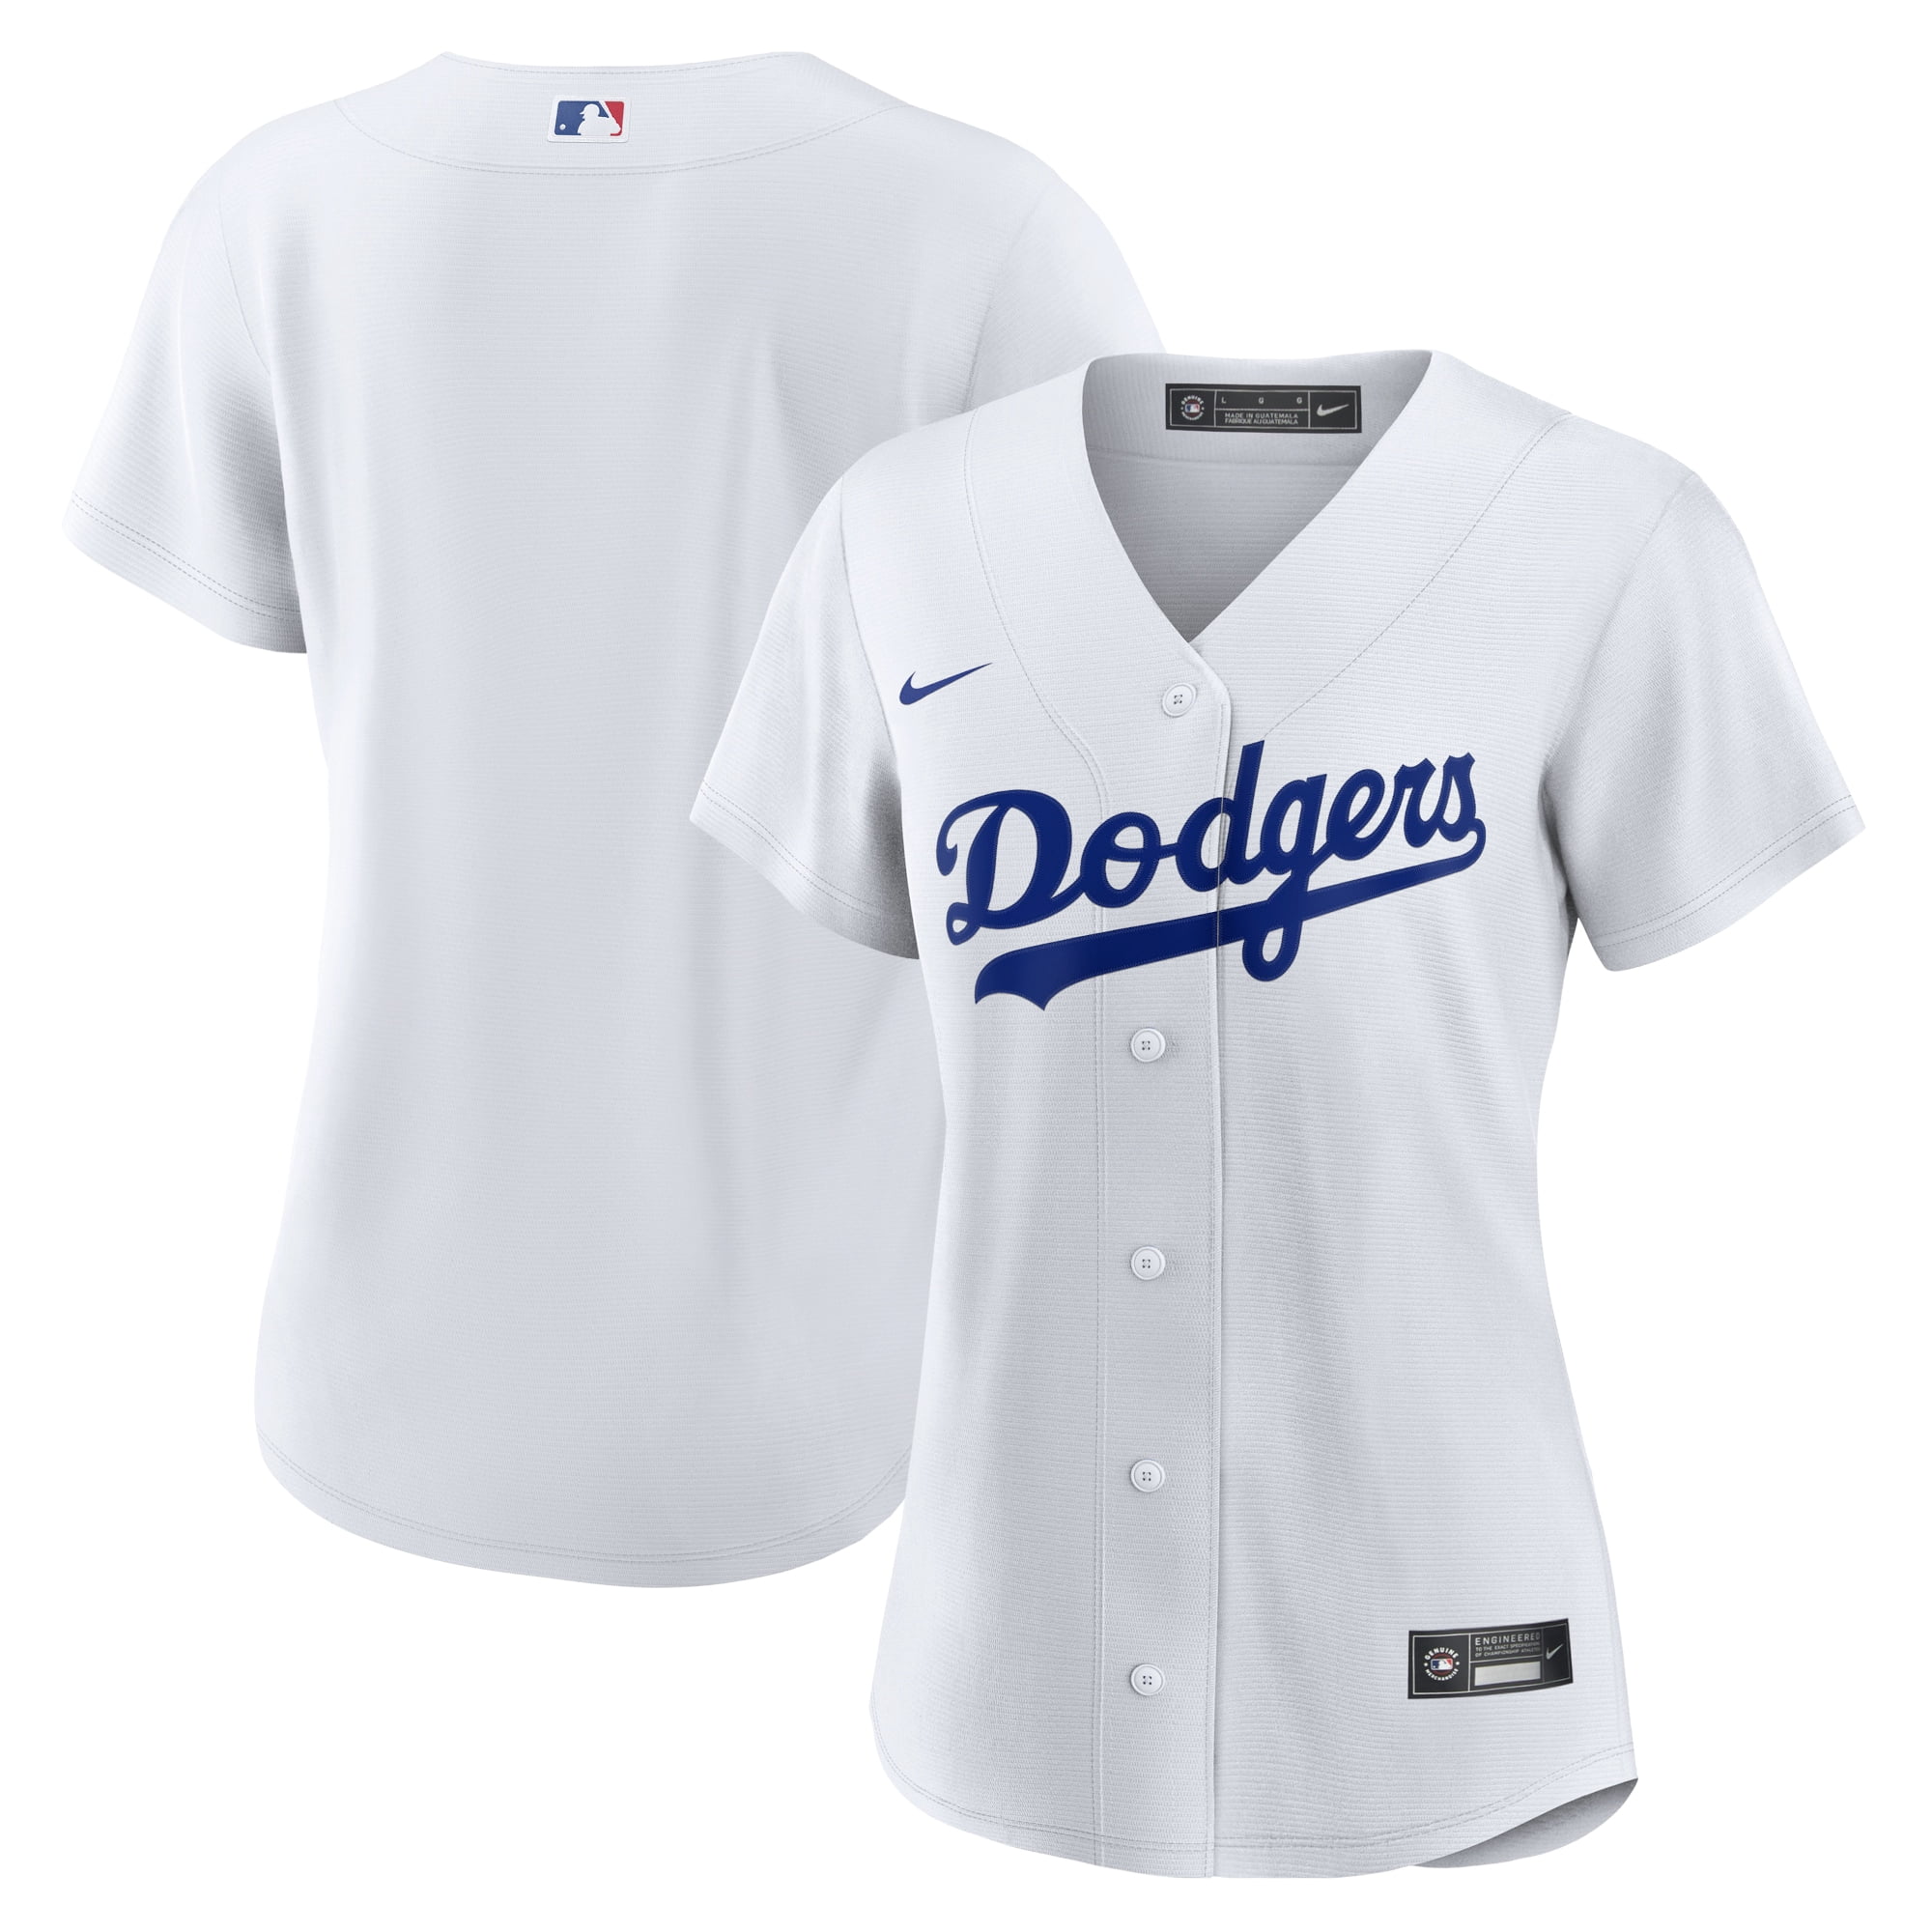 Nike Dodgers Home Replica Jersey - Youth S / White